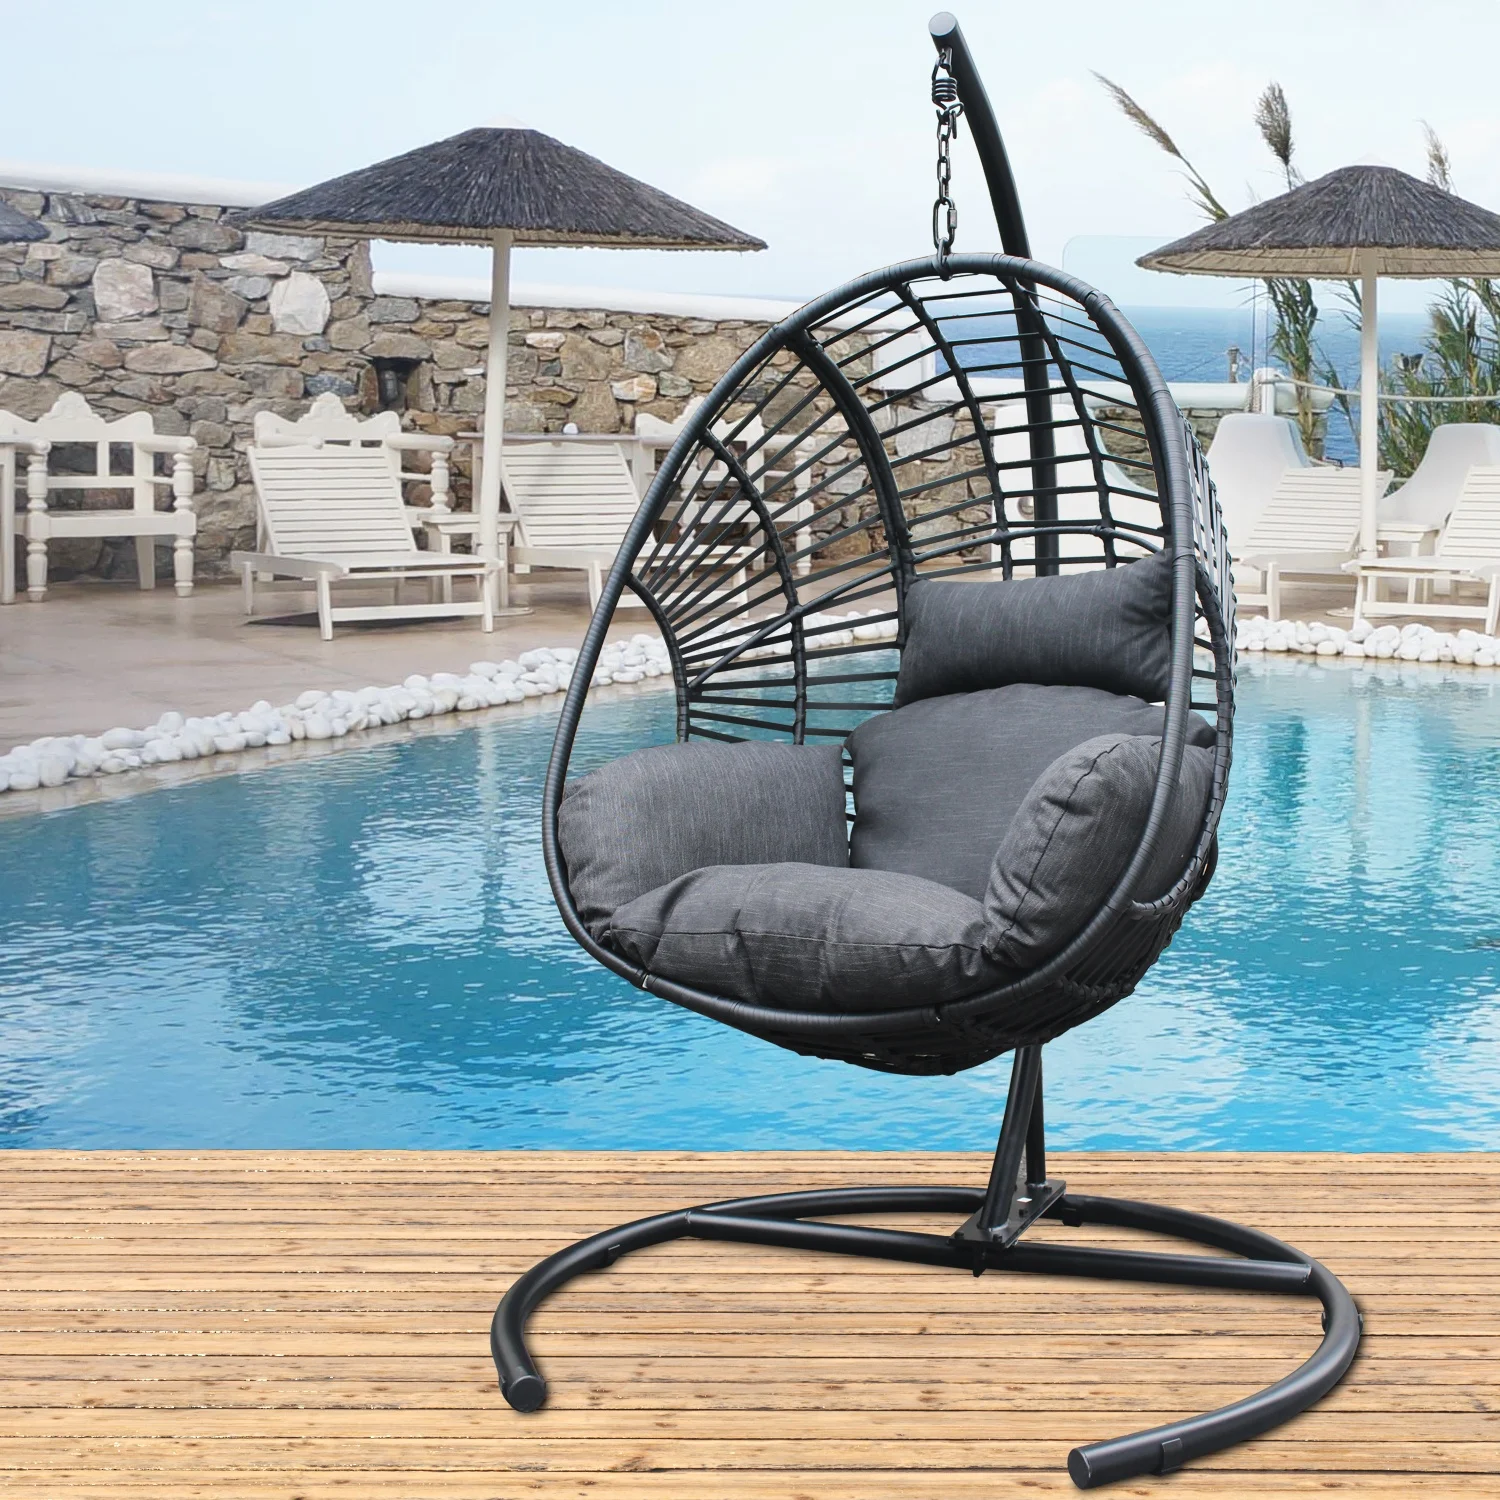 Patio Swings Garden Home Furniture Kd With Cushion Swing Egg Outdoor Rattan Hanging Chair Buy Egg Chair Hanging Egg Relax Leisure Wicker Furniture Commercial Swing Outdoor Patio Garden Swinging Chairs Manufacturers Hammock